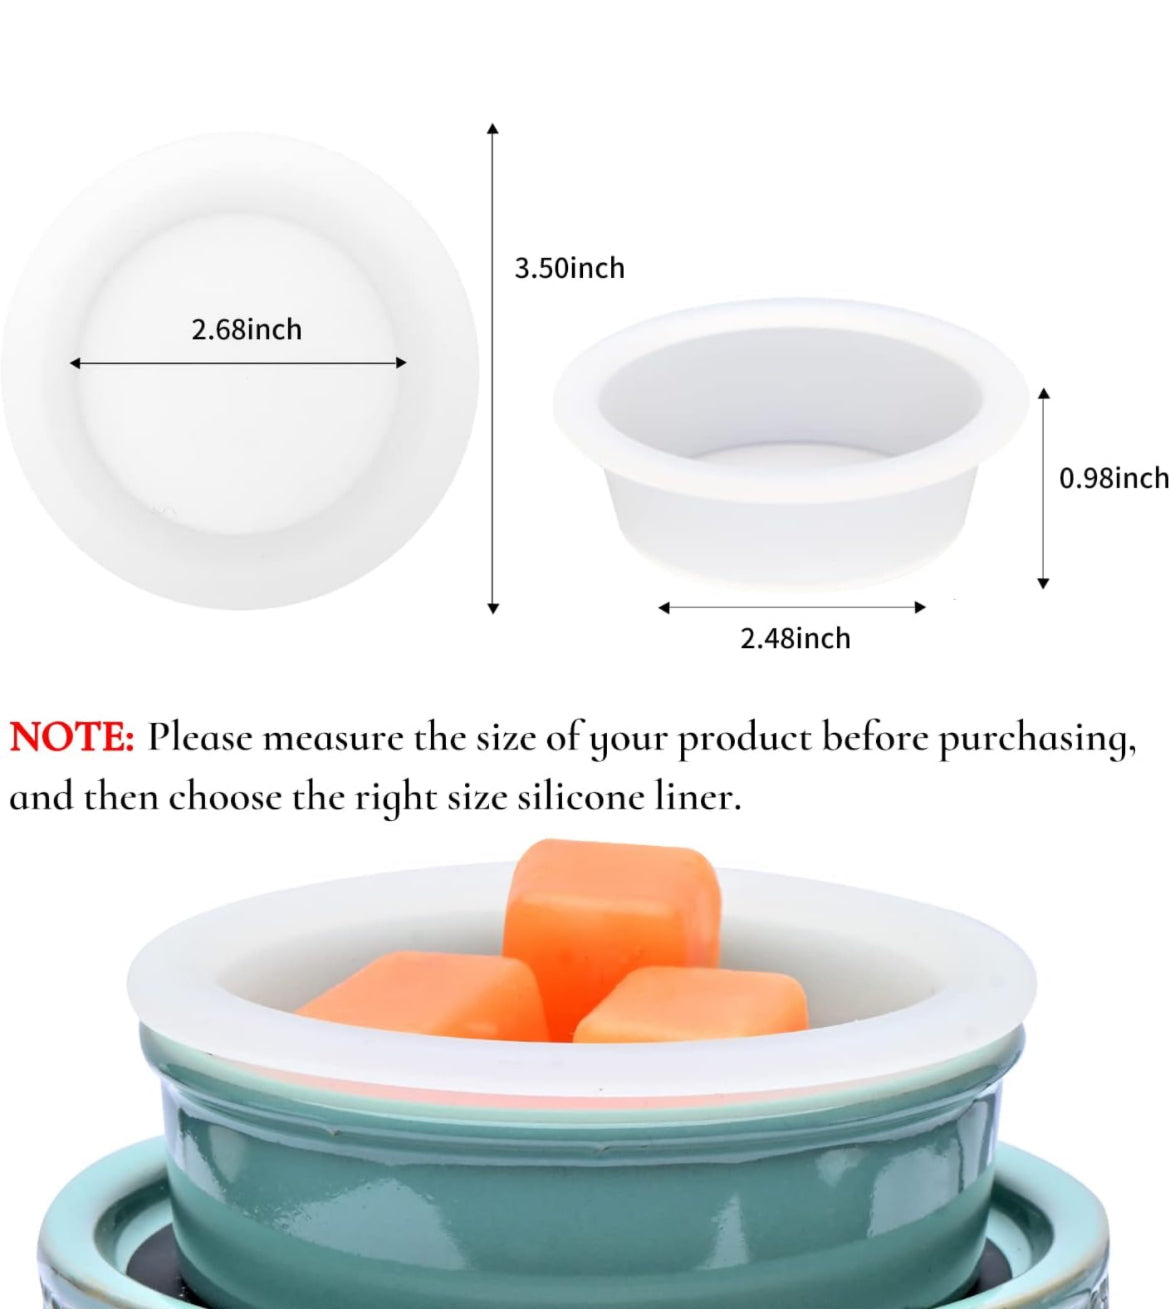 "SiliMelt Wax Warmer Liners: Mess-Free Wax Melting Solution"